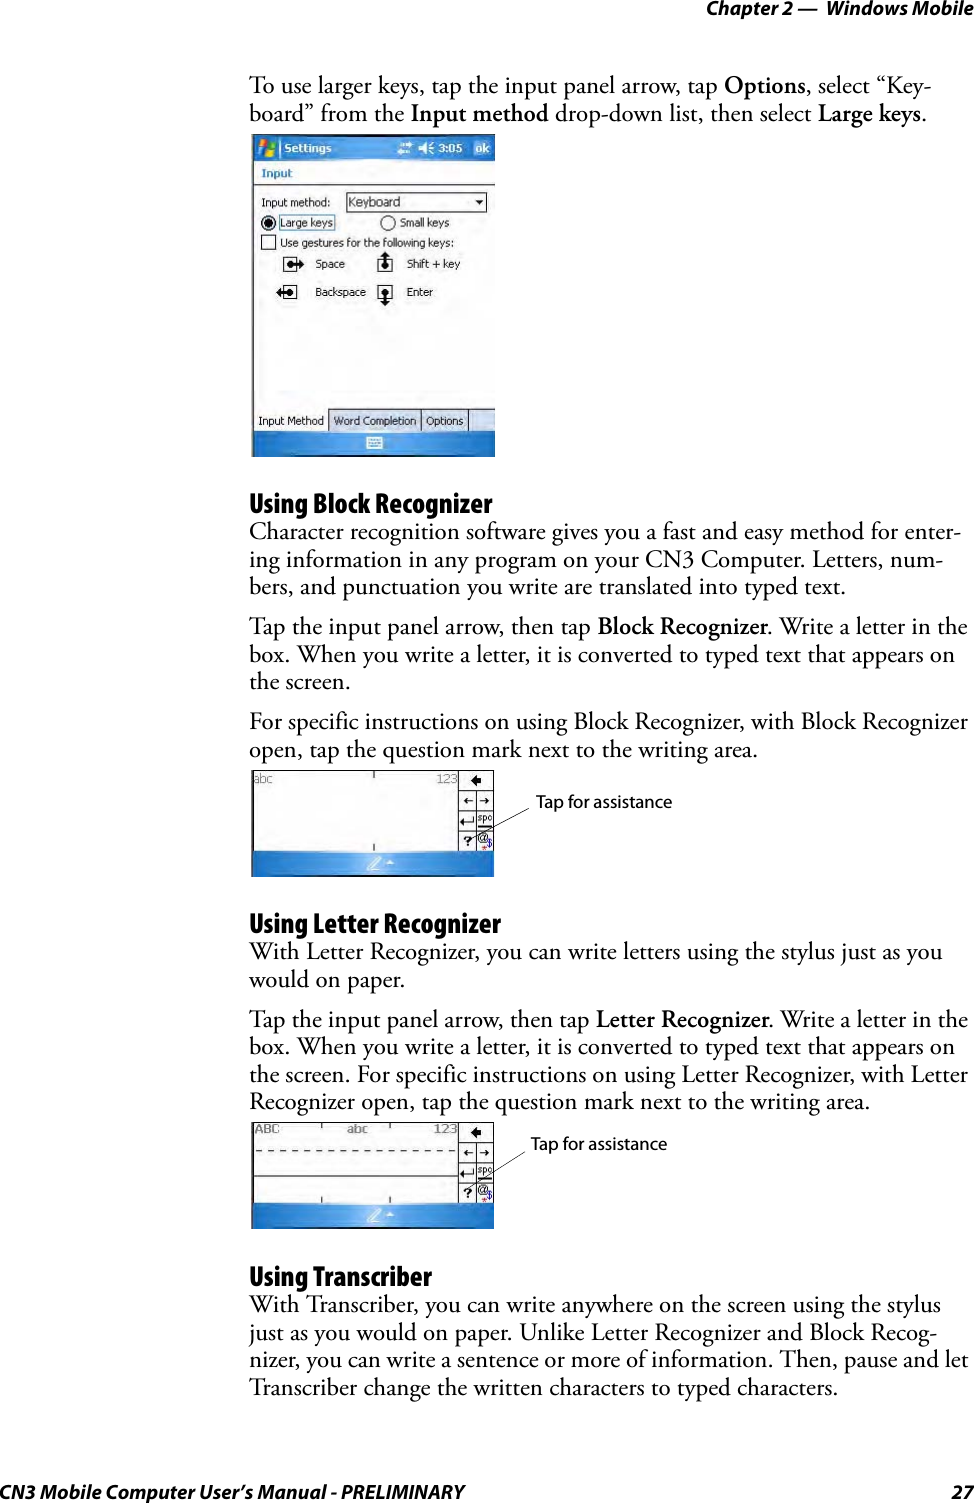 Chapter 2 —  Windows MobileCN3 Mobile Computer User’s Manual - PRELIMINARY 27To use larger keys, tap the input panel arrow, tap Options, select “Key-board” from the Input method drop-down list, then select Large keys.Using Block RecognizerCharacter recognition software gives you a fast and easy method for enter-ing information in any program on your CN3 Computer. Letters, num-bers, and punctuation you write are translated into typed text.Tap the input panel arrow, then tap Block Recognizer. Write a letter in the box. When you write a letter, it is converted to typed text that appears on the screen.For specific instructions on using Block Recognizer, with Block Recognizer open, tap the question mark next to the writing area.Using Letter RecognizerWith Letter Recognizer, you can write letters using the stylus just as you would on paper.Tap the input panel arrow, then tap Letter Recognizer. Write a letter in the box. When you write a letter, it is converted to typed text that appears on the screen. For specific instructions on using Letter Recognizer, with Letter Recognizer open, tap the question mark next to the writing area.Using TranscriberWith Transcriber, you can write anywhere on the screen using the stylus just as you would on paper. Unlike Letter Recognizer and Block Recog-nizer, you can write a sentence or more of information. Then, pause and let Transcriber change the written characters to typed characters.Tap for assistanceTap for assistance